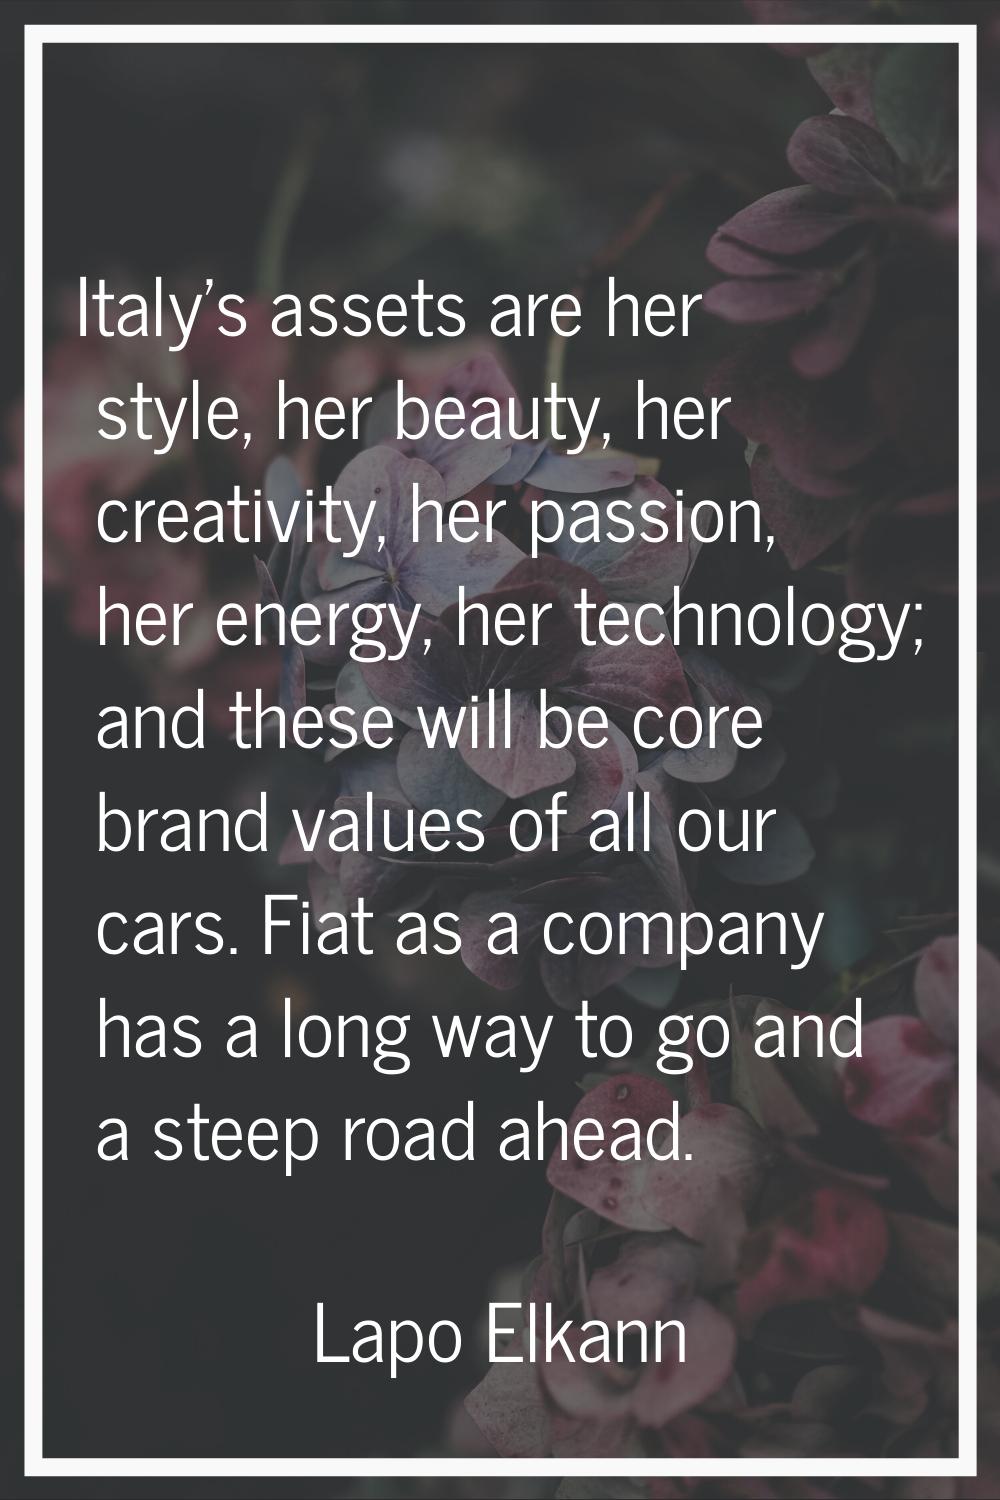 Italy's assets are her style, her beauty, her creativity, her passion, her energy, her technology; 